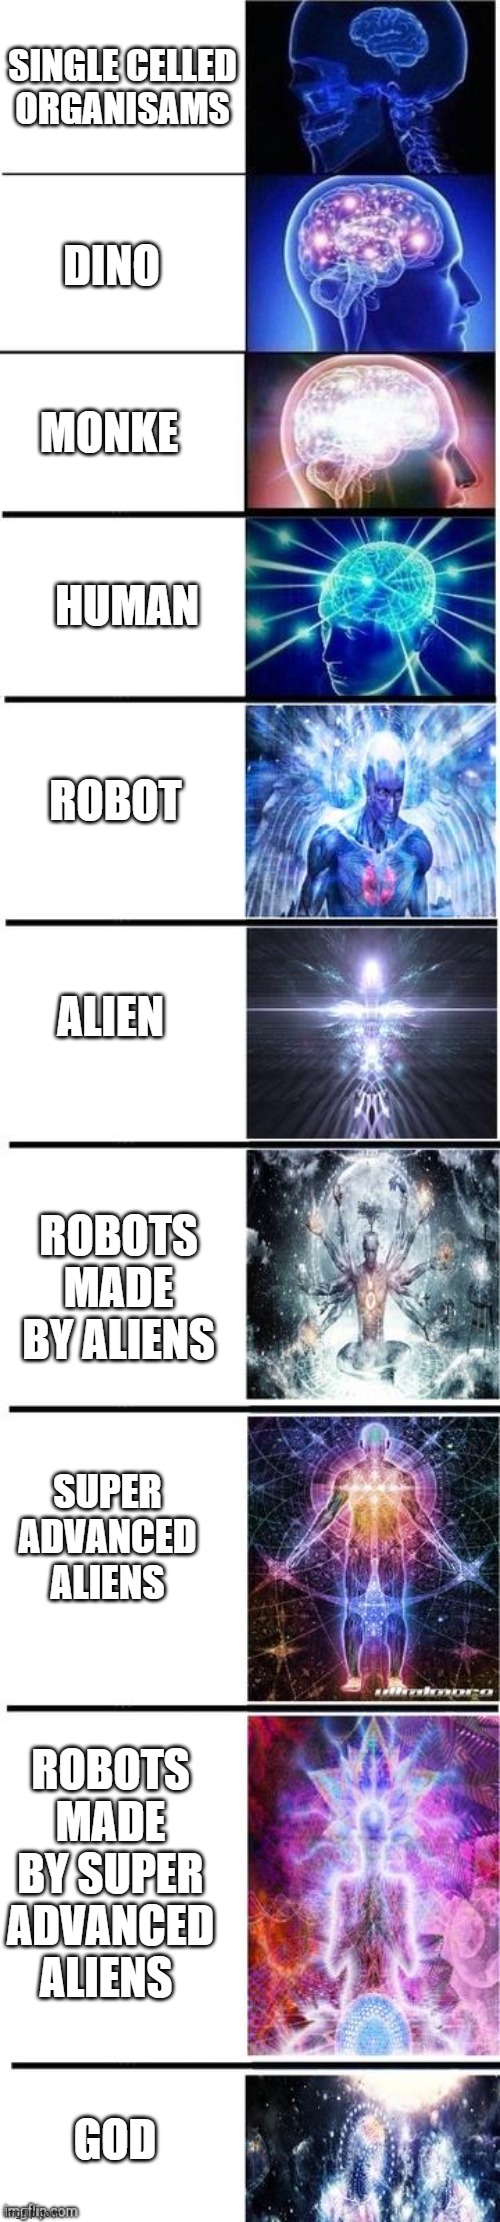 boi | SINGLE CELLED ORGANISAMS; DINO; MONKE; HUMAN; ROBOT; ALIEN; ROBOTS MADE BY ALIENS; SUPER ADVANCED ALIENS; ROBOTS MADE BY SUPER ADVANCED ALIENS; GOD | image tagged in expanding brain 10 panel | made w/ Imgflip meme maker